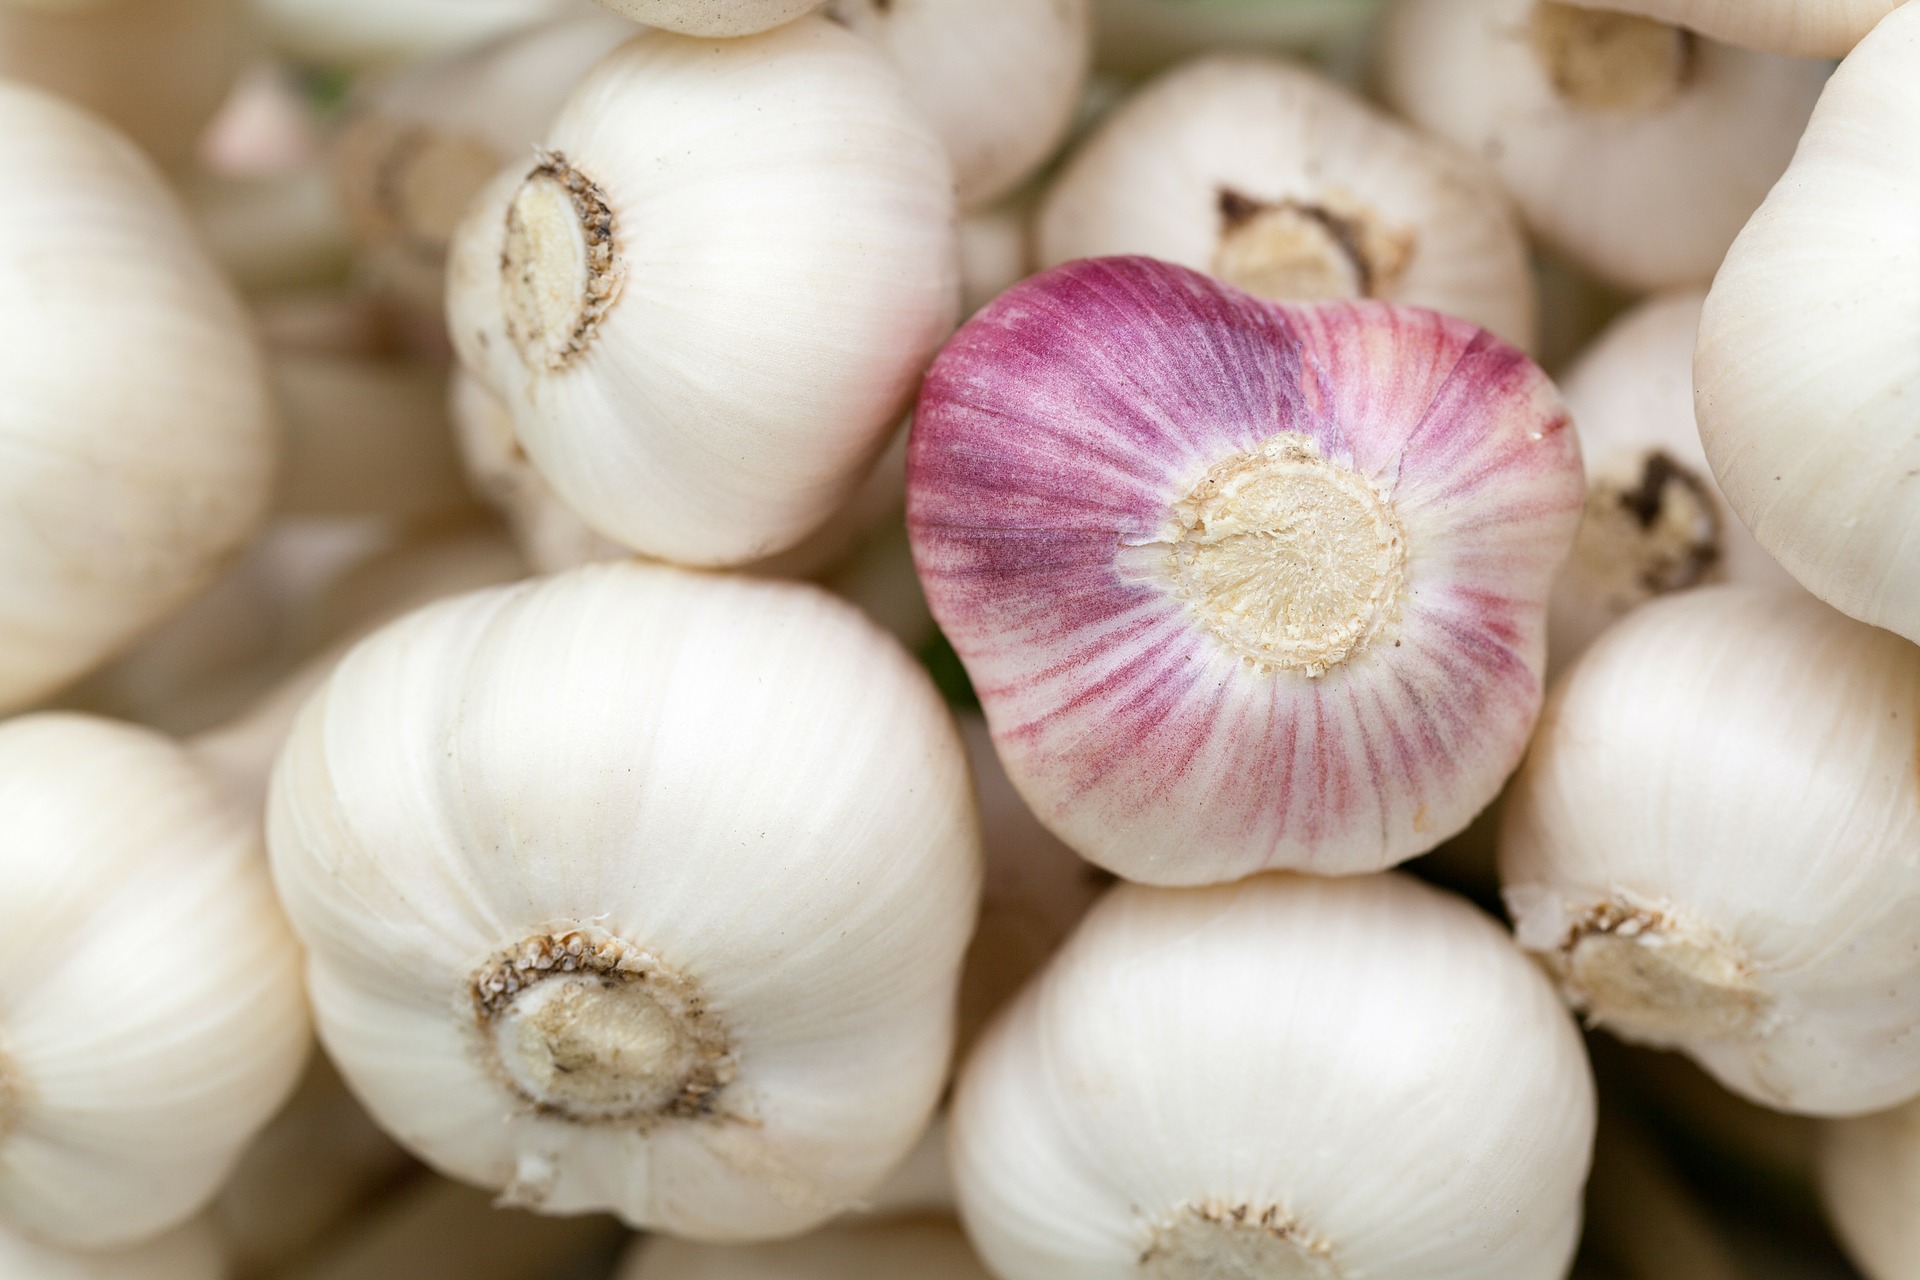 Garlic is a huge immunity booster and is good for treating common colds. 